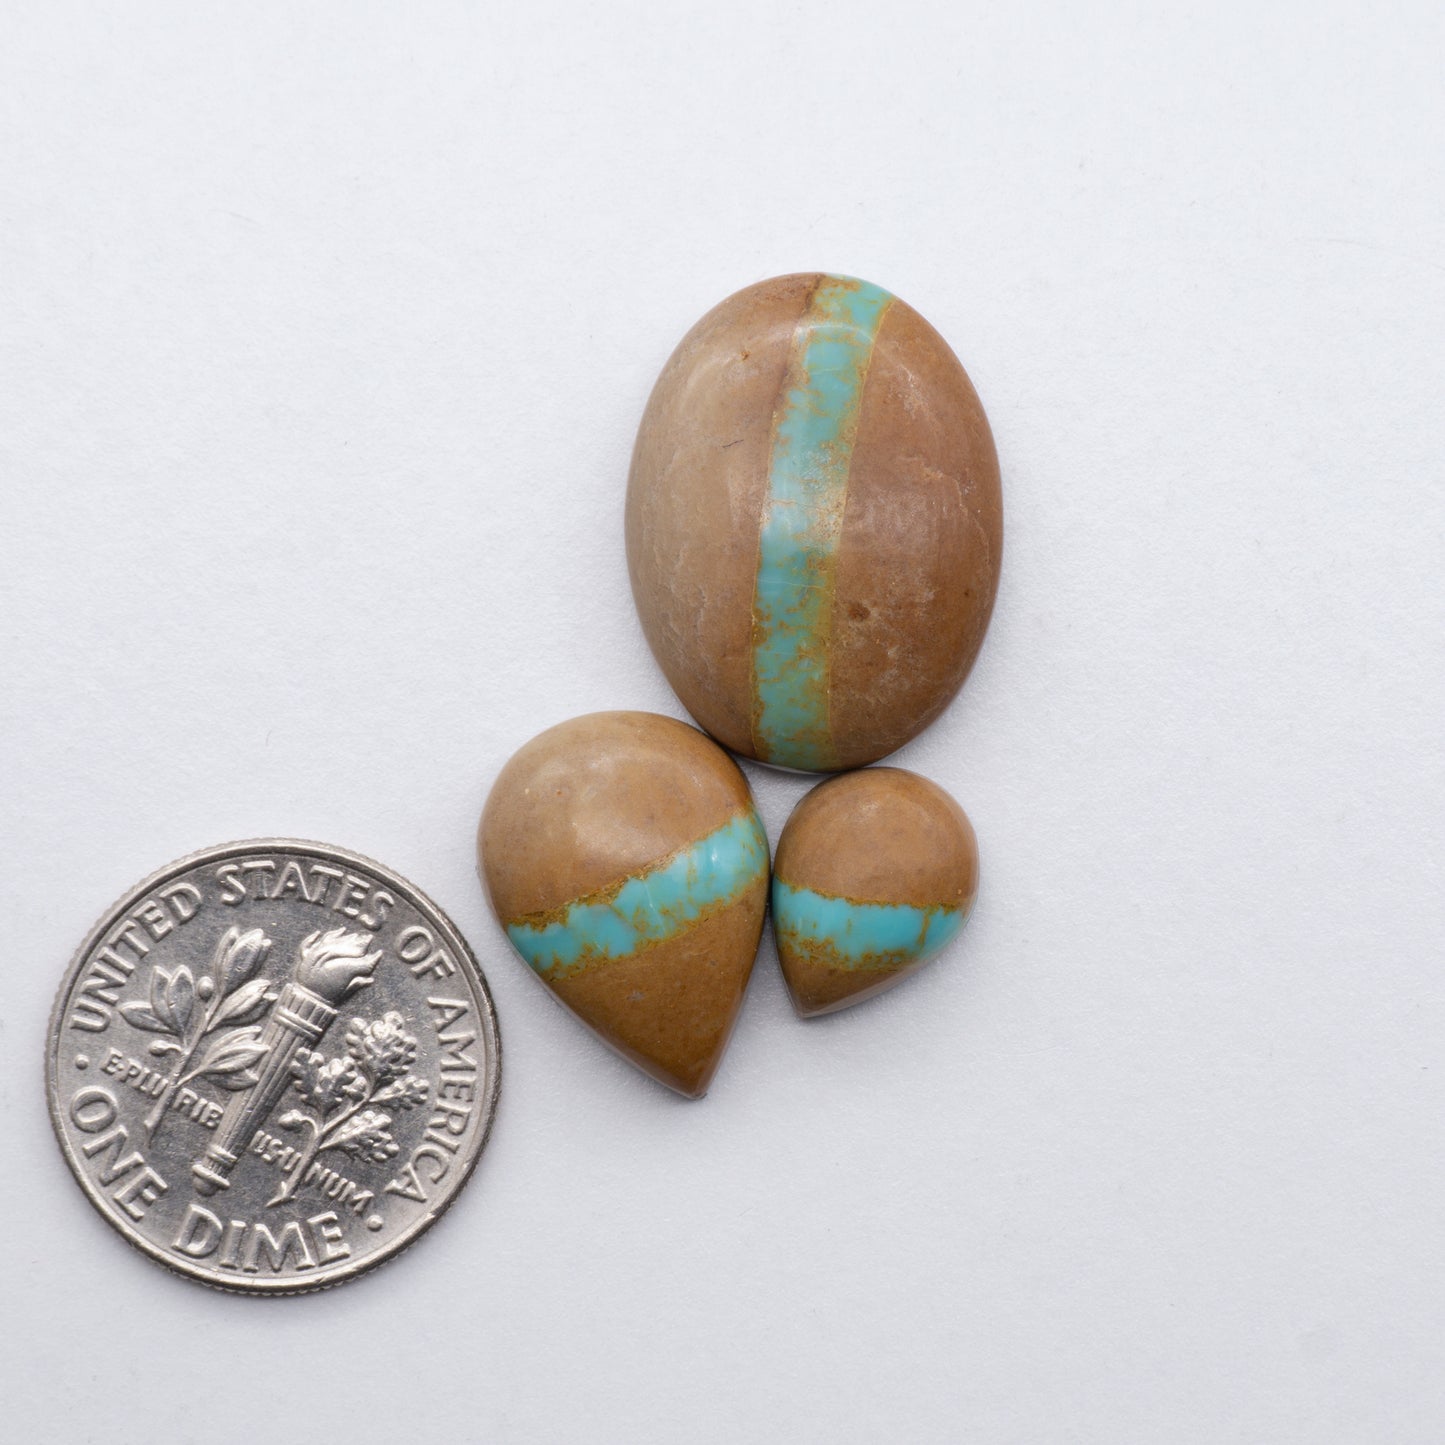 These beautiful blue green turquoise cabochons have a glossy finish and are backed for added strength. Mined in Colorado, USA. Similar to Royston turquoise used for jewelry making.